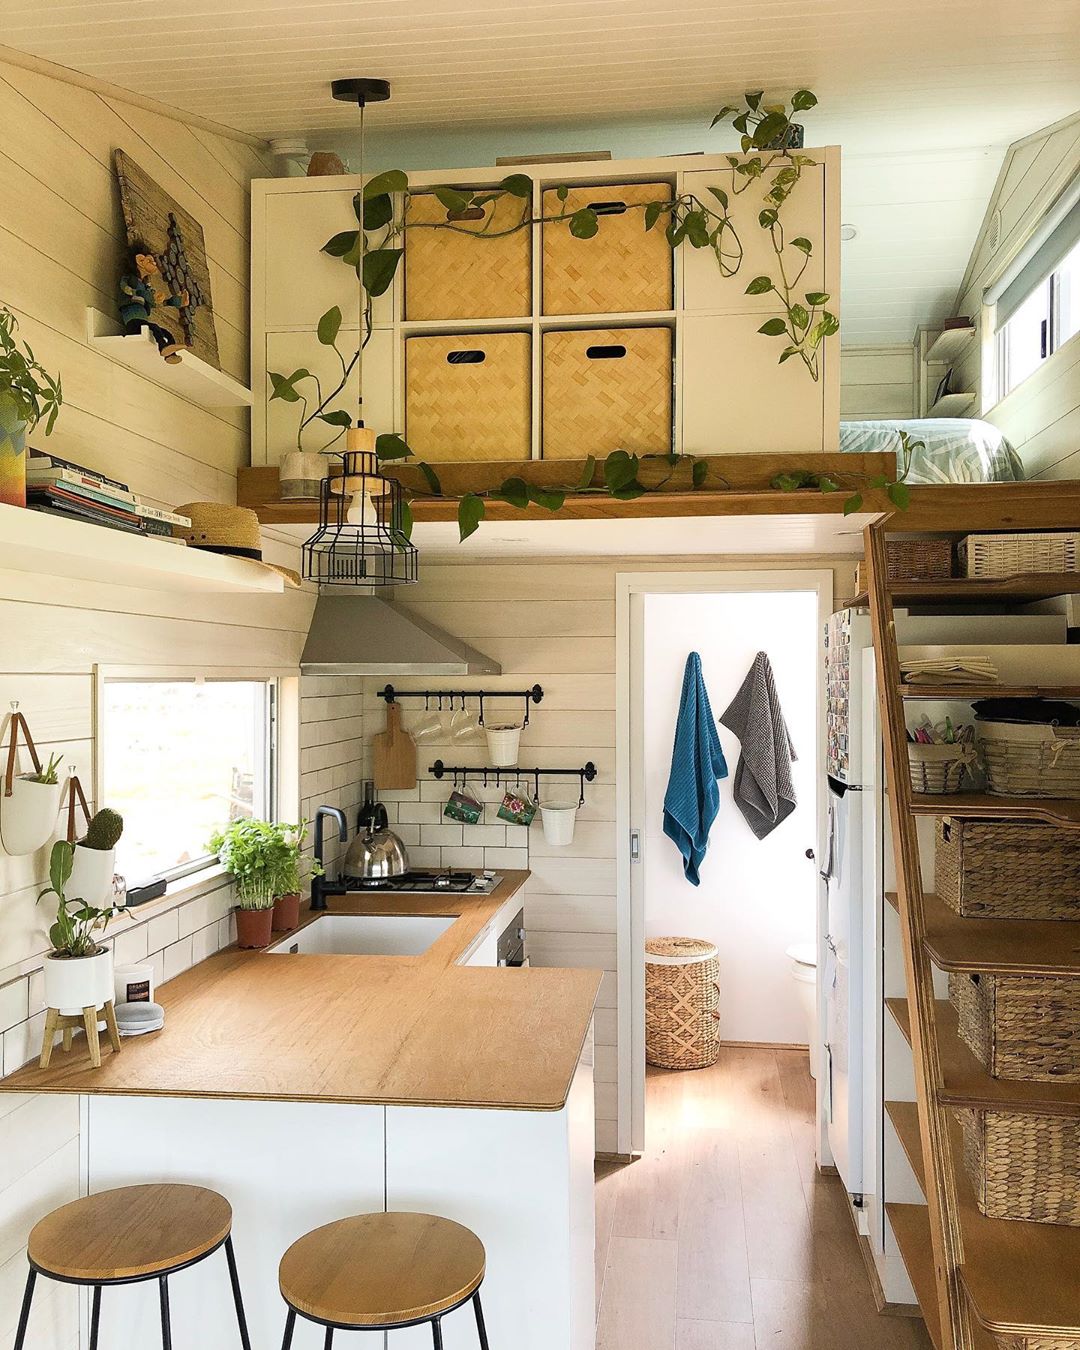 Tiny home with all white walls and plants hanging from ceiling. Photo by Instagram user @girlinatinyhouse